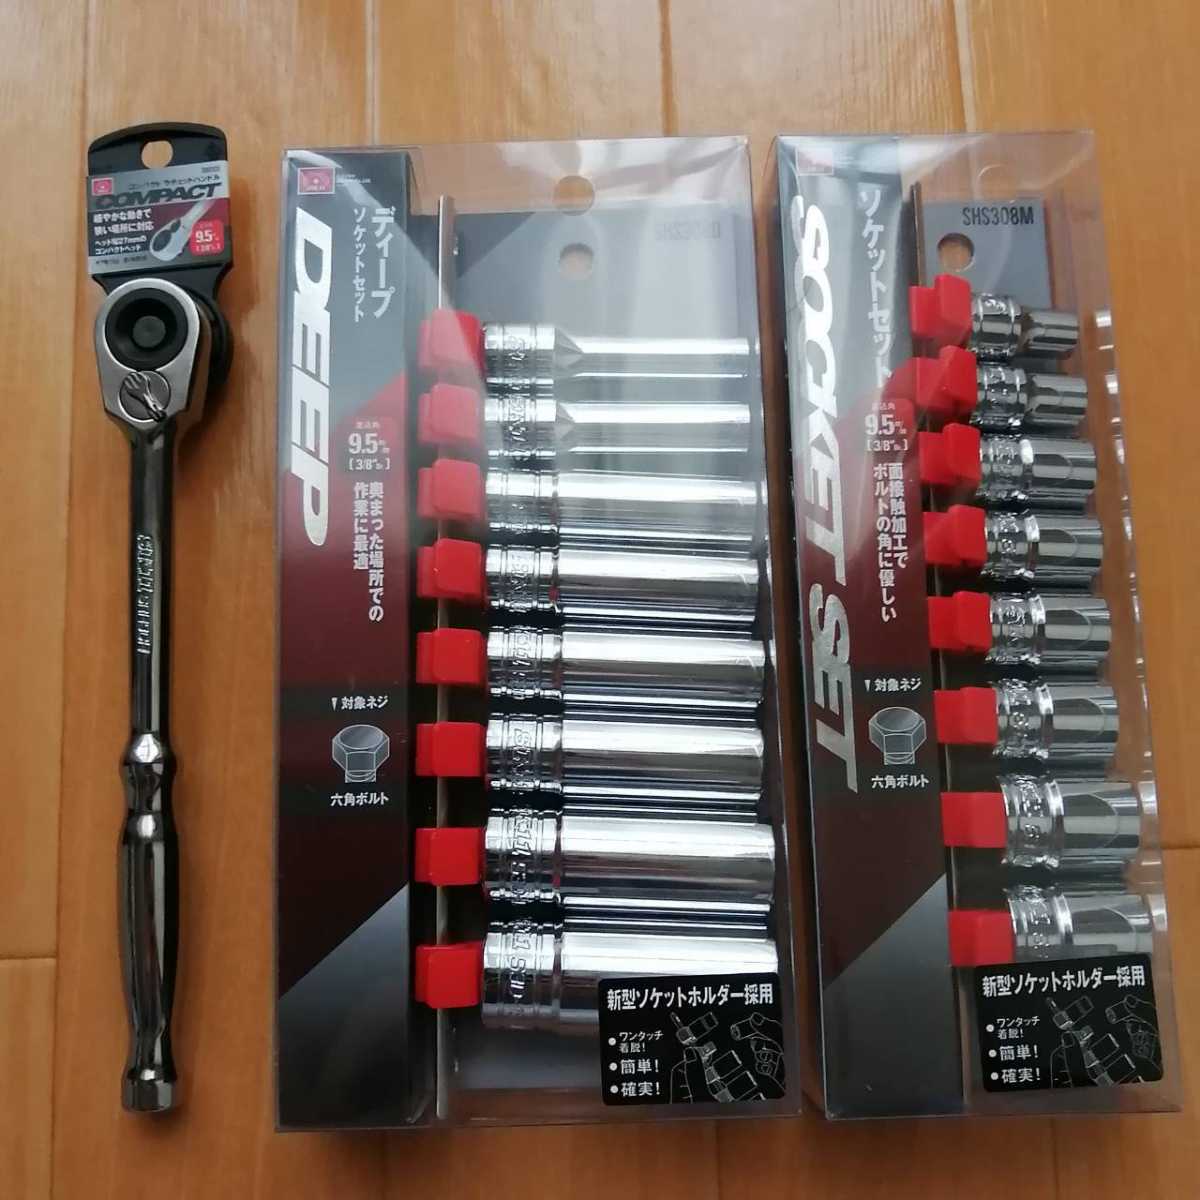 SK11 整備工具セット 133点組 レッド 各種メンテナンス対応 SST-16133RE 通販 